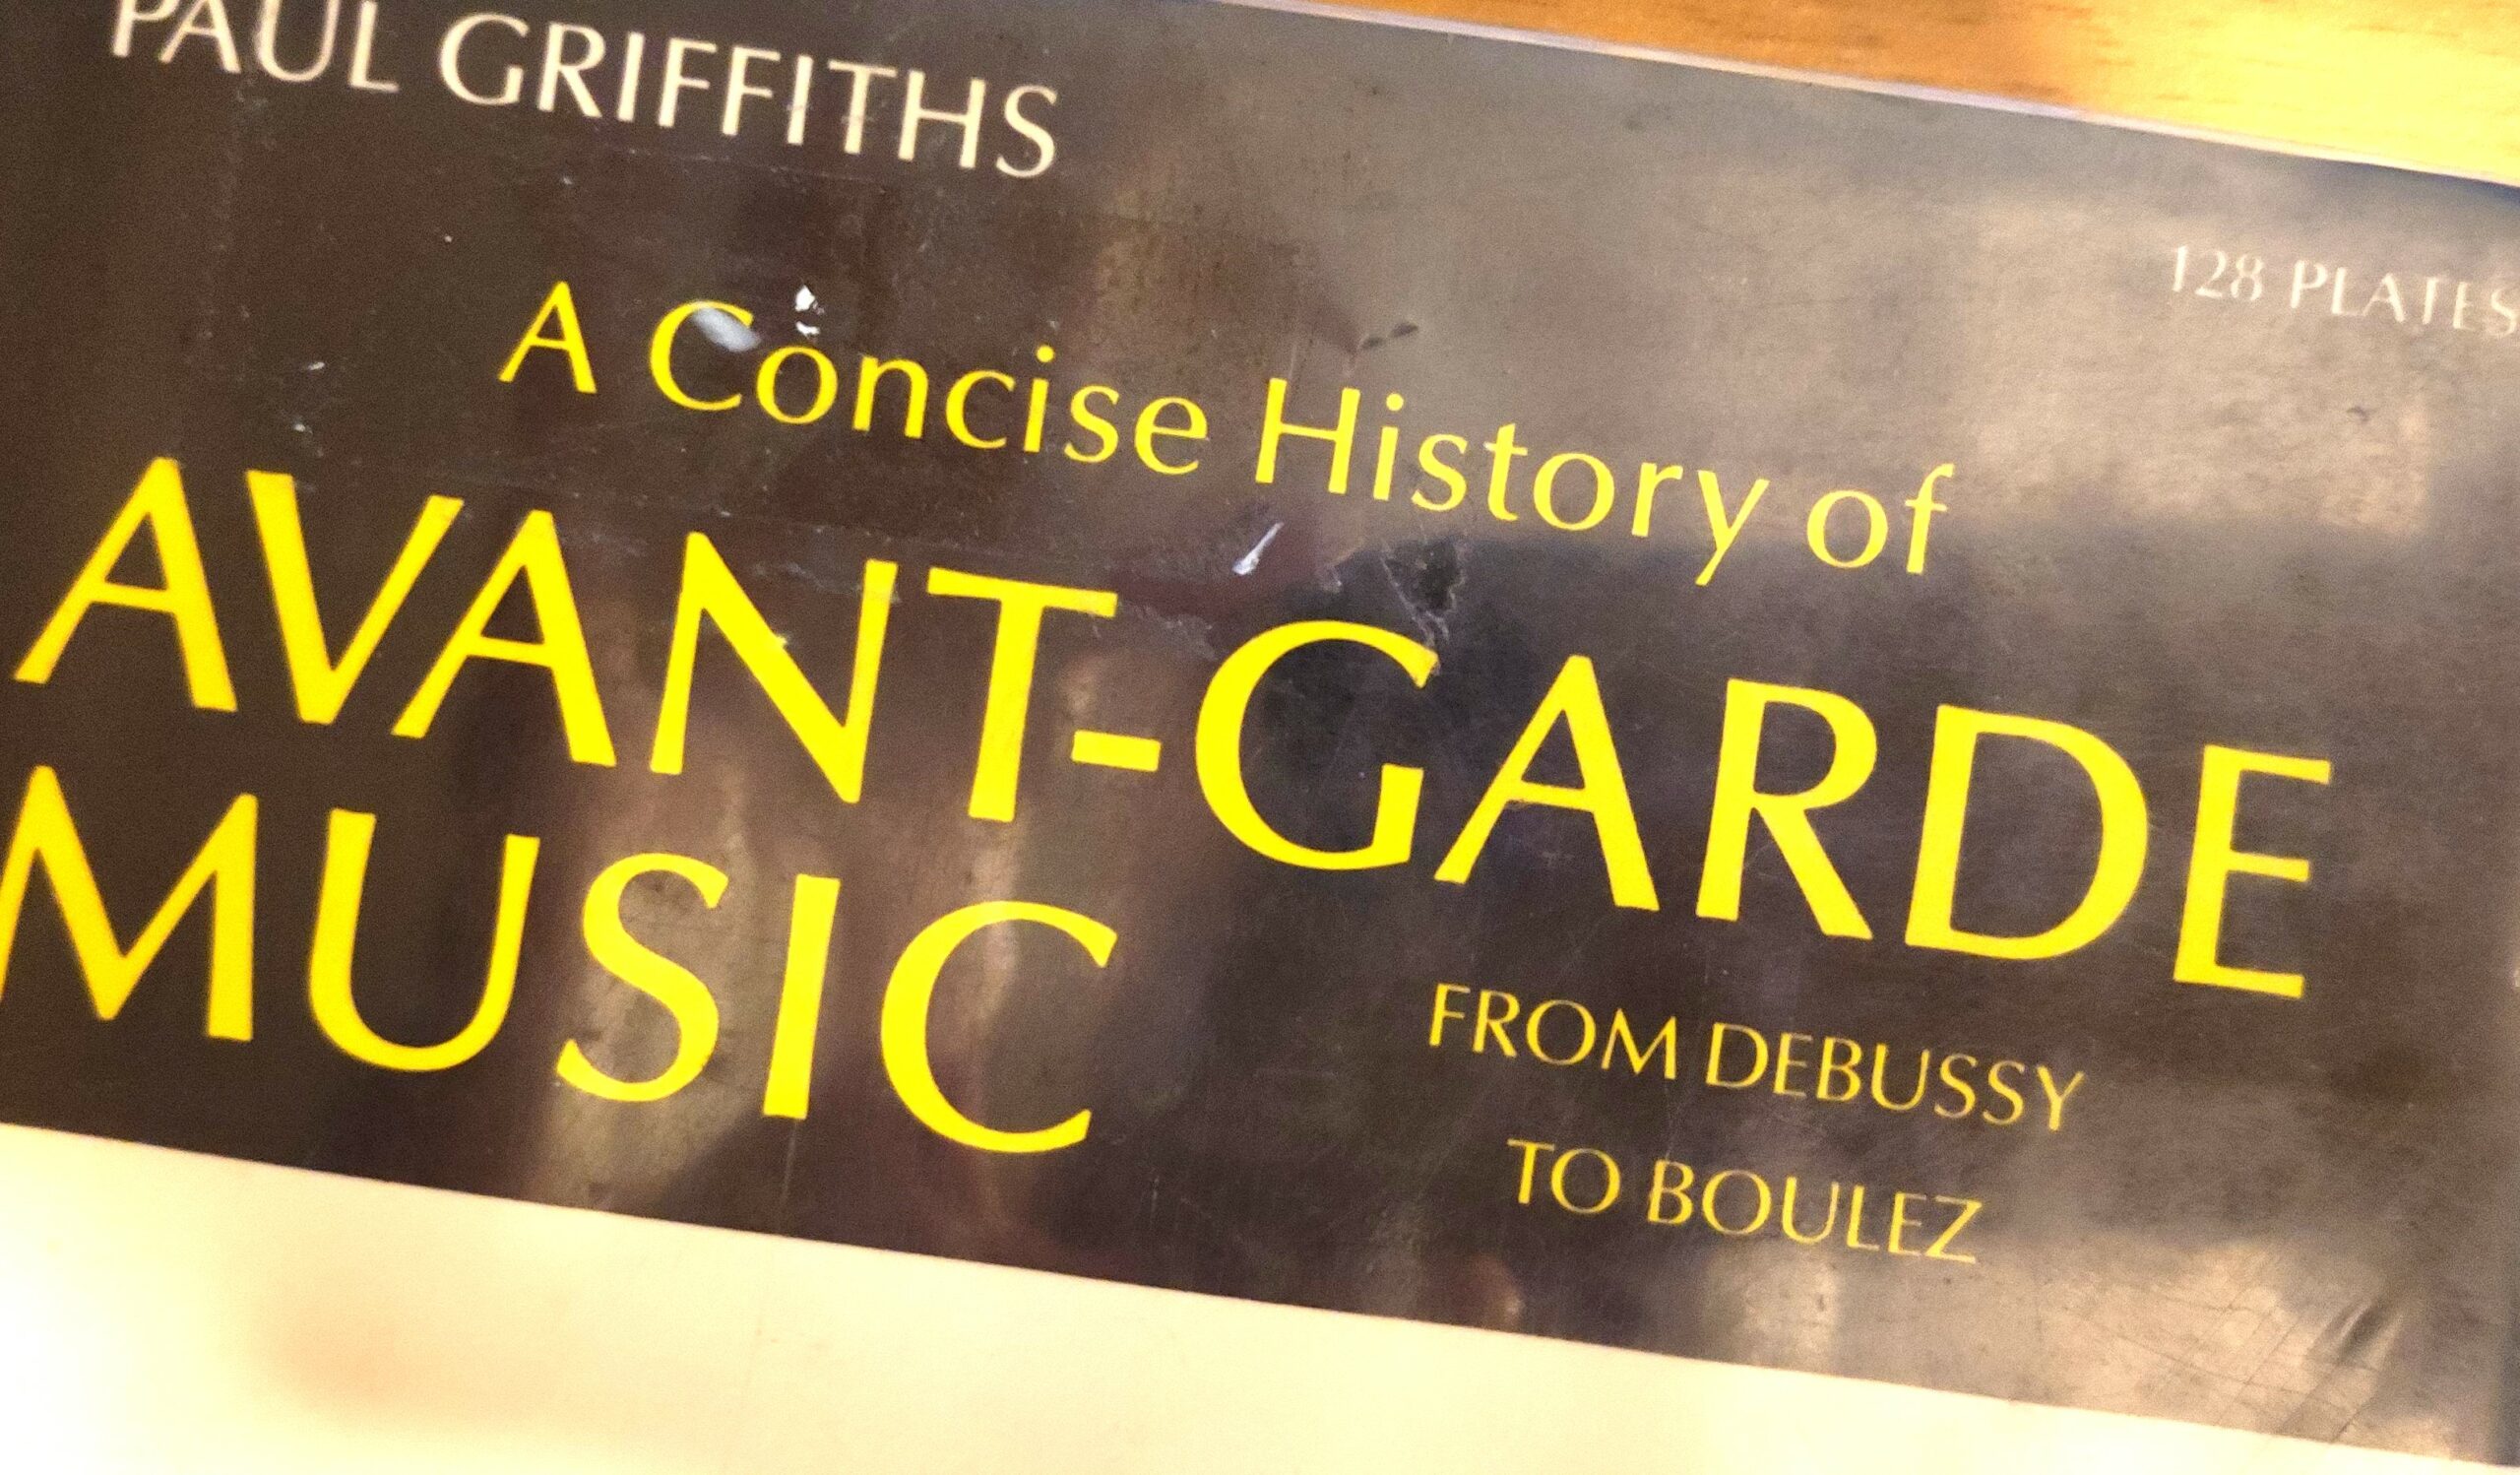 Paul Griffiths – A Concise History of Avant-Garde Music